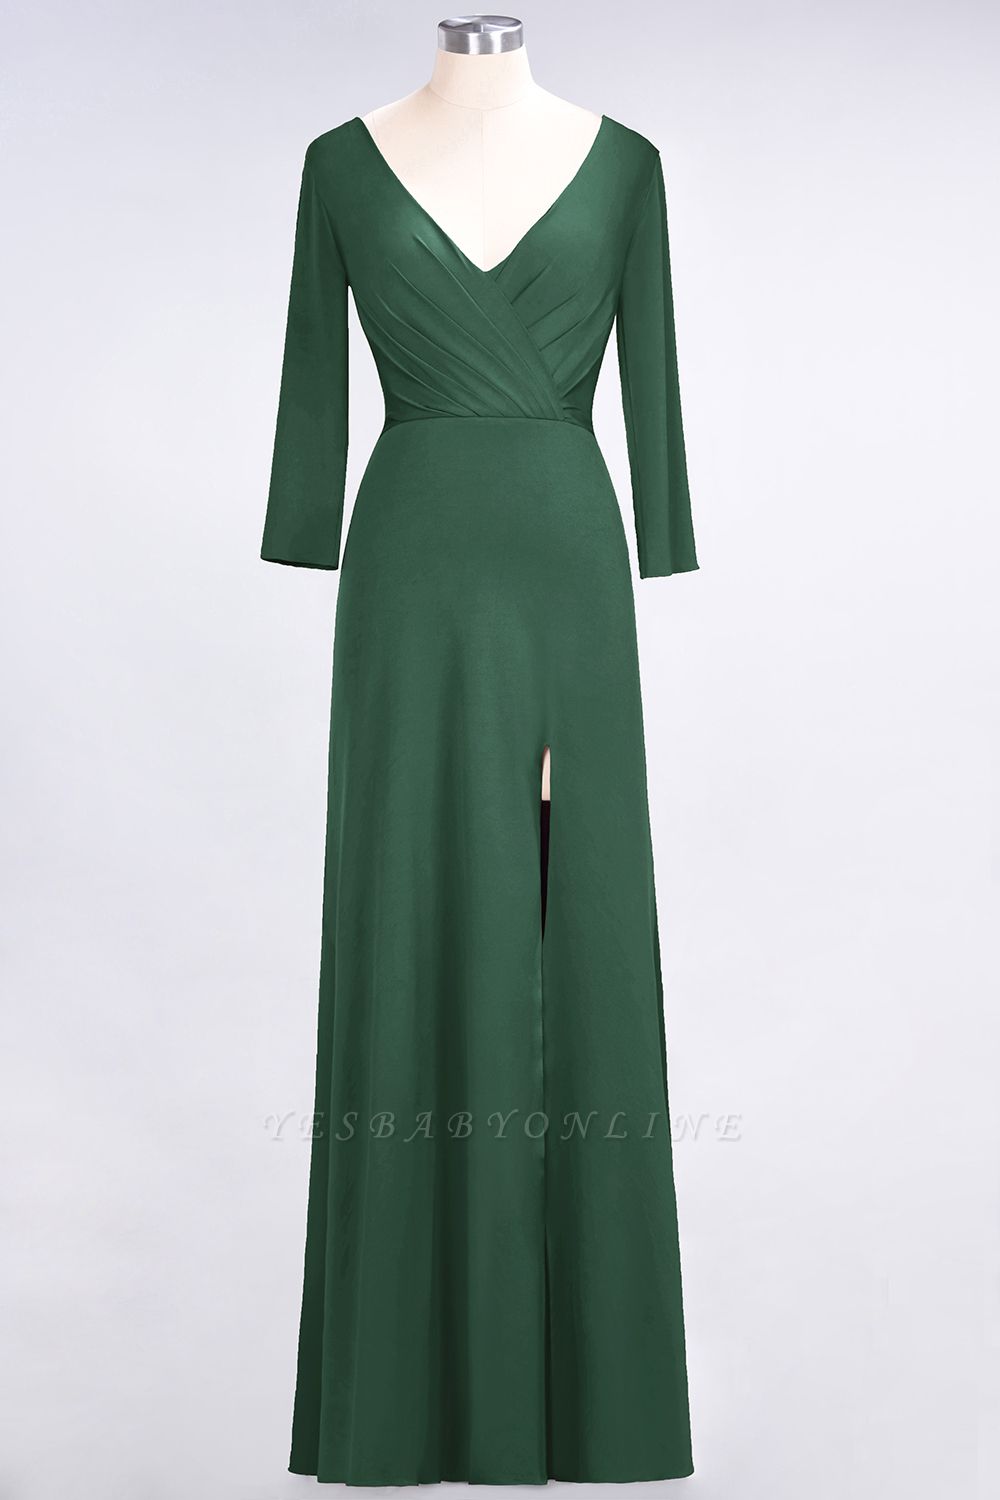 A-Line V-Neck Long-Sleeves Side-Slit Floor-Length Spandex Bridesmaid Dress with Ruffles